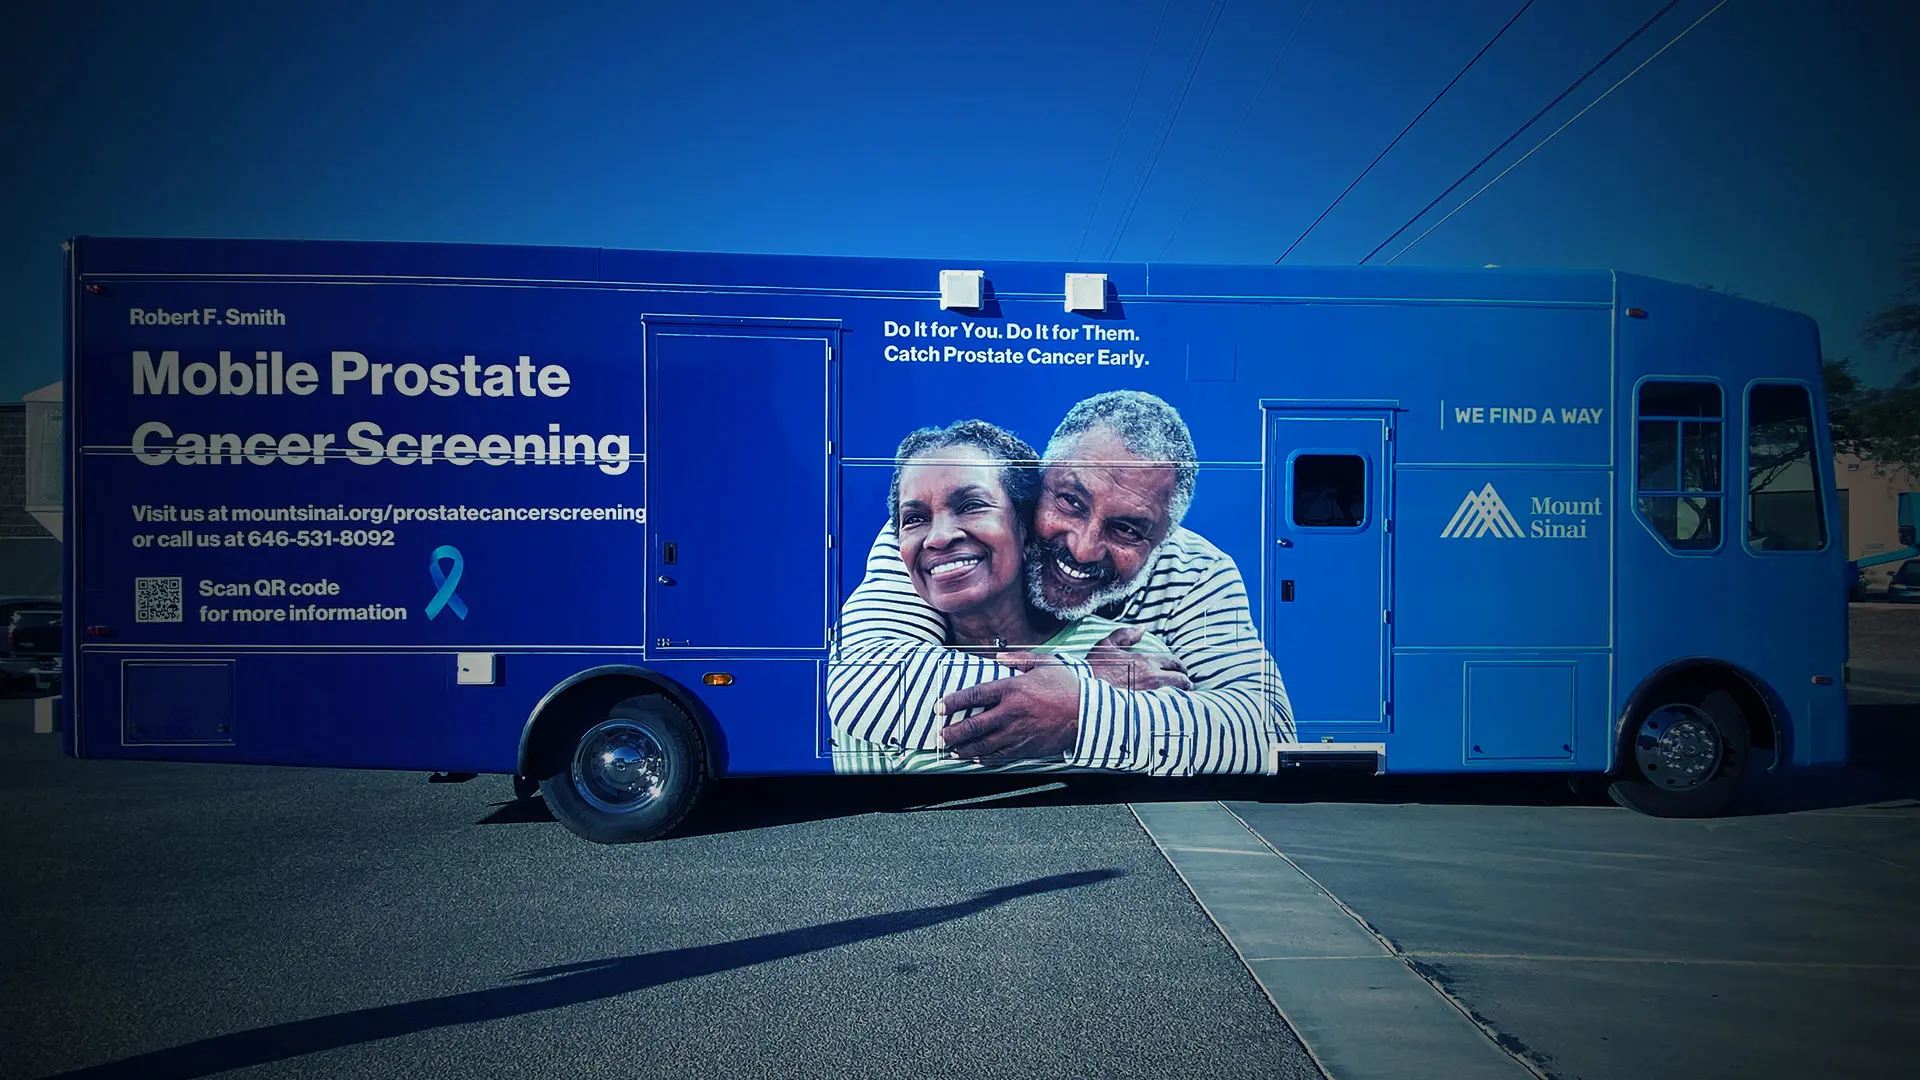 The Mount Sinai Robert F. Smith Mobile Prostate Cancer Screening Unit Is Reaching Black Men in Their Communities